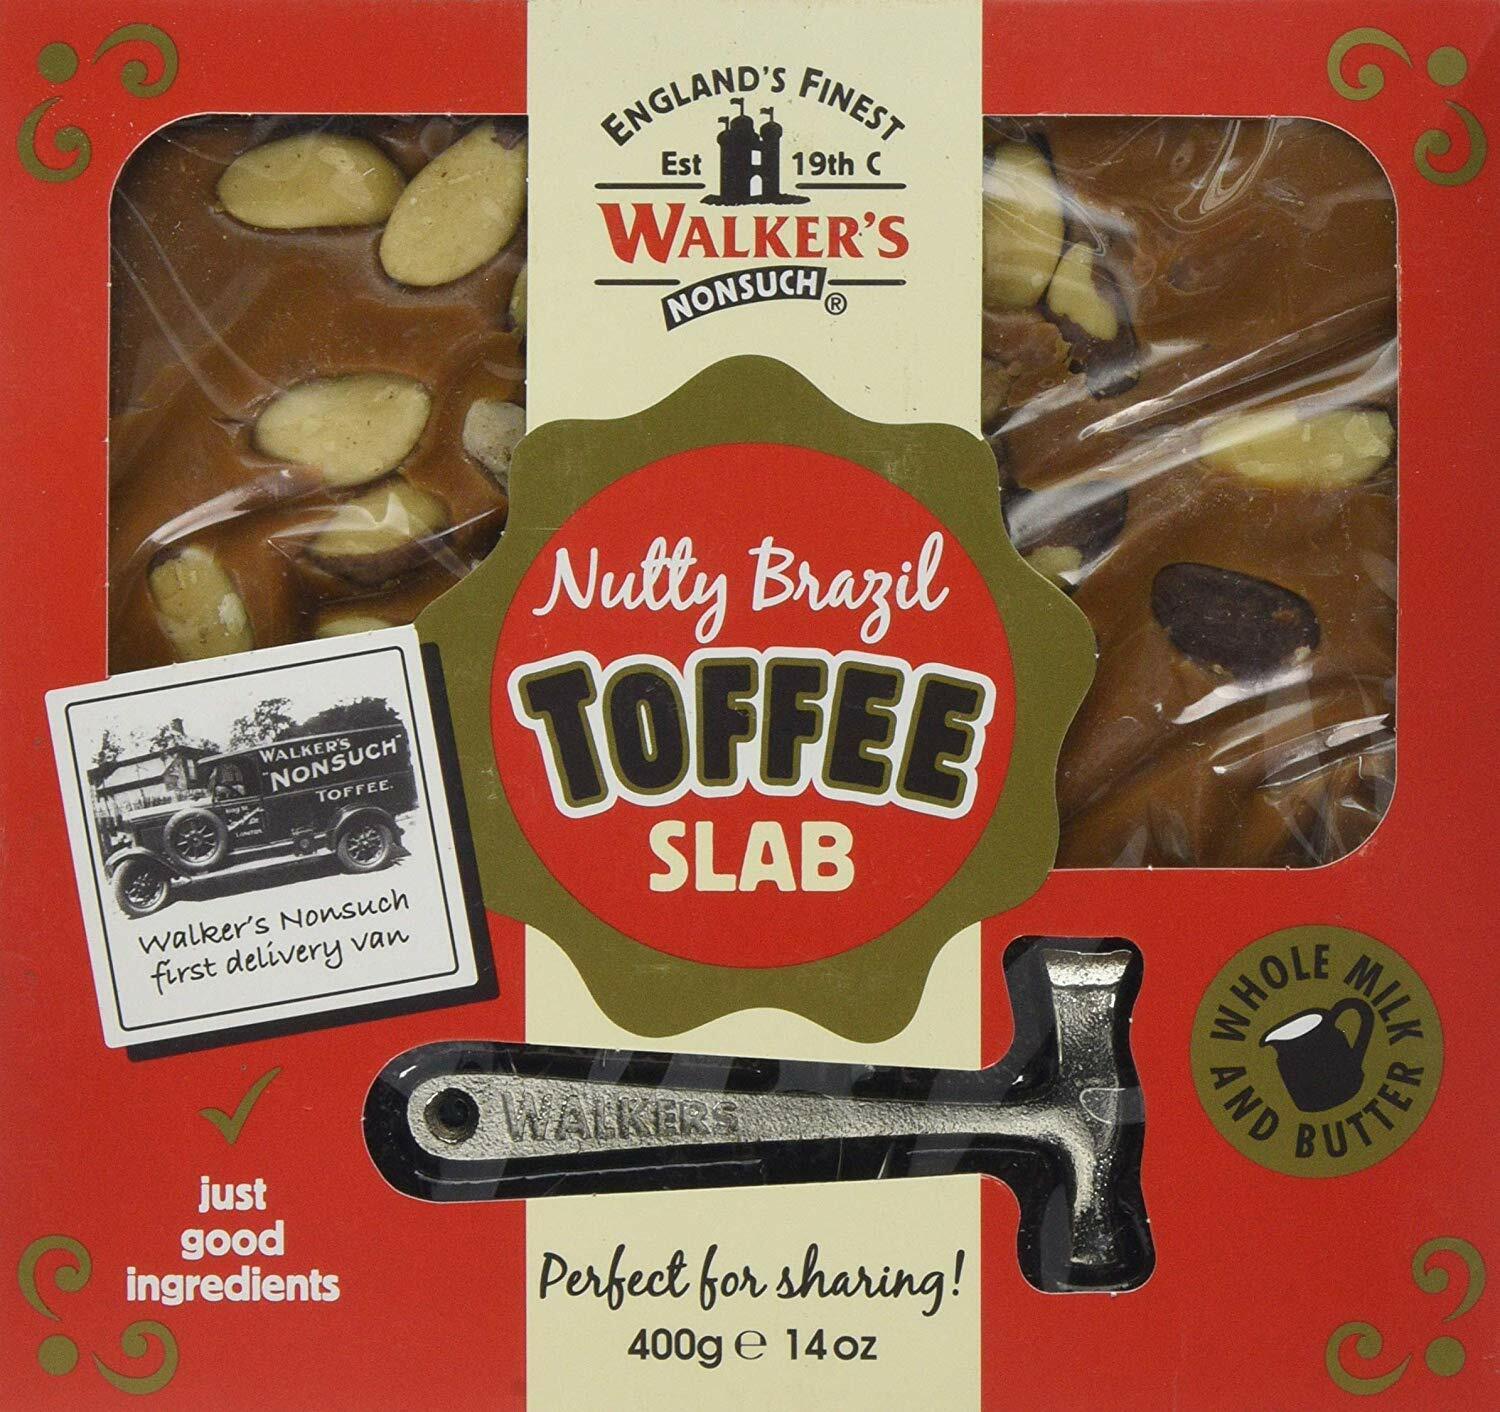 Walkers Nutty Brazil Toffee Slab 400G - Jessica's Sweets